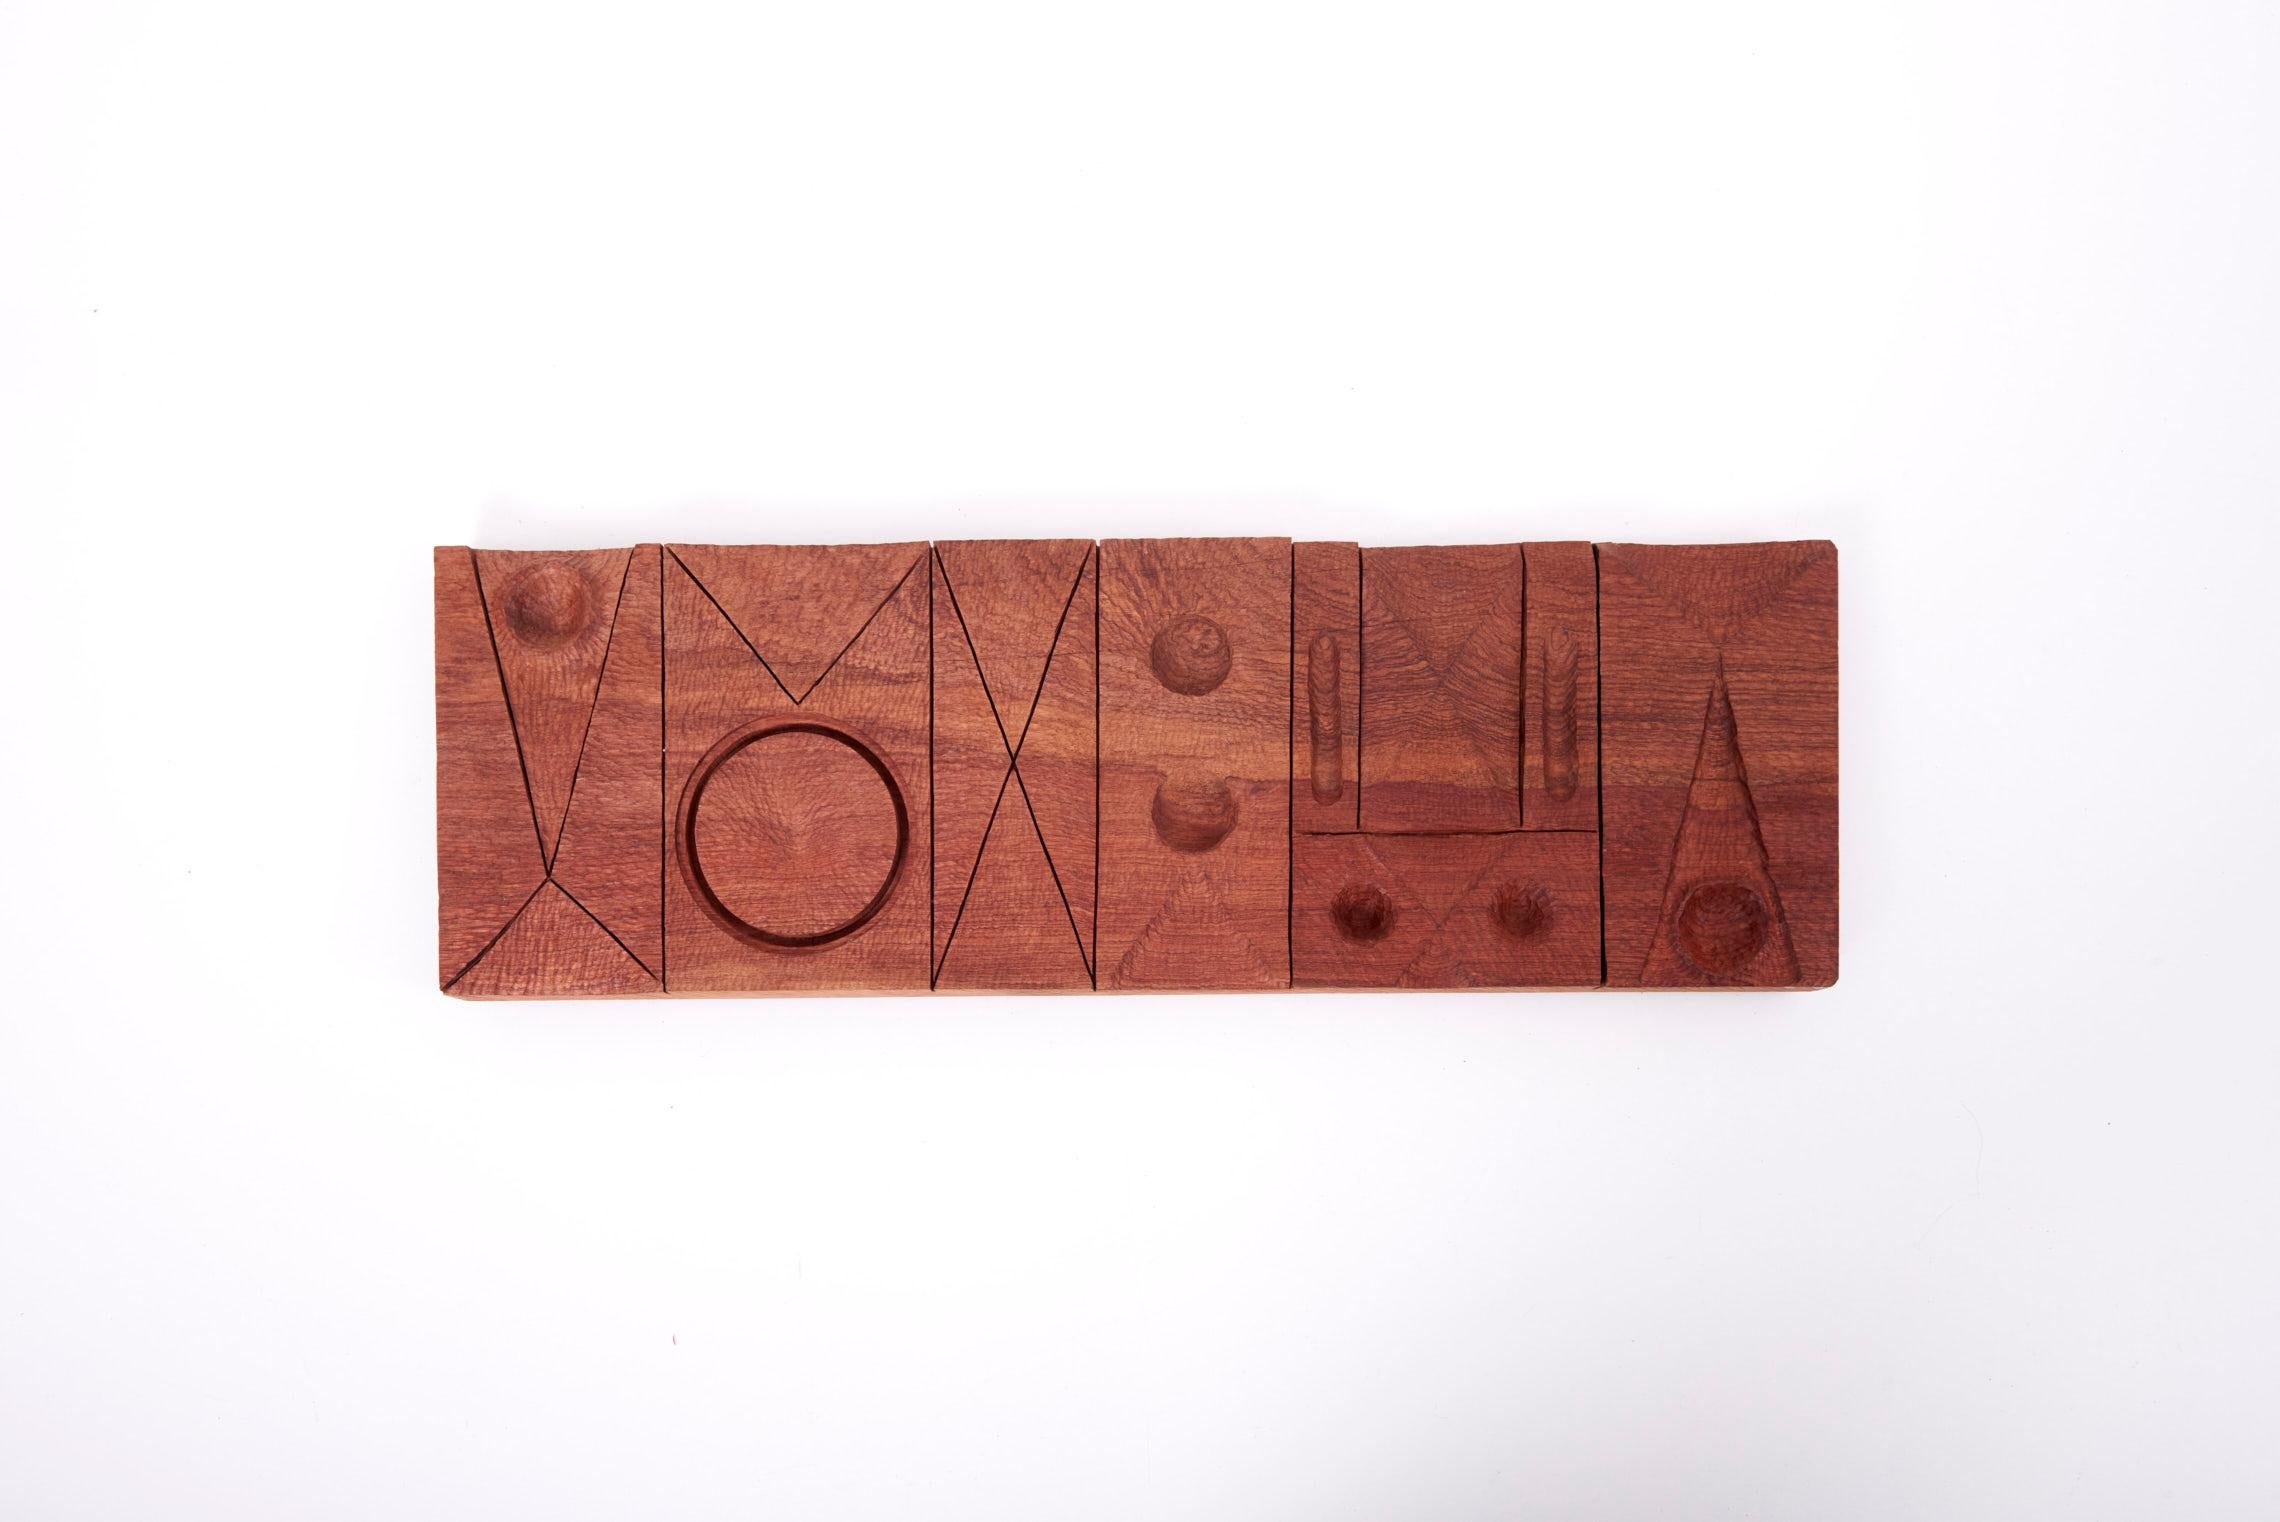 Studio wood wall sculpture panel by Michael Rozell, US, 2020.